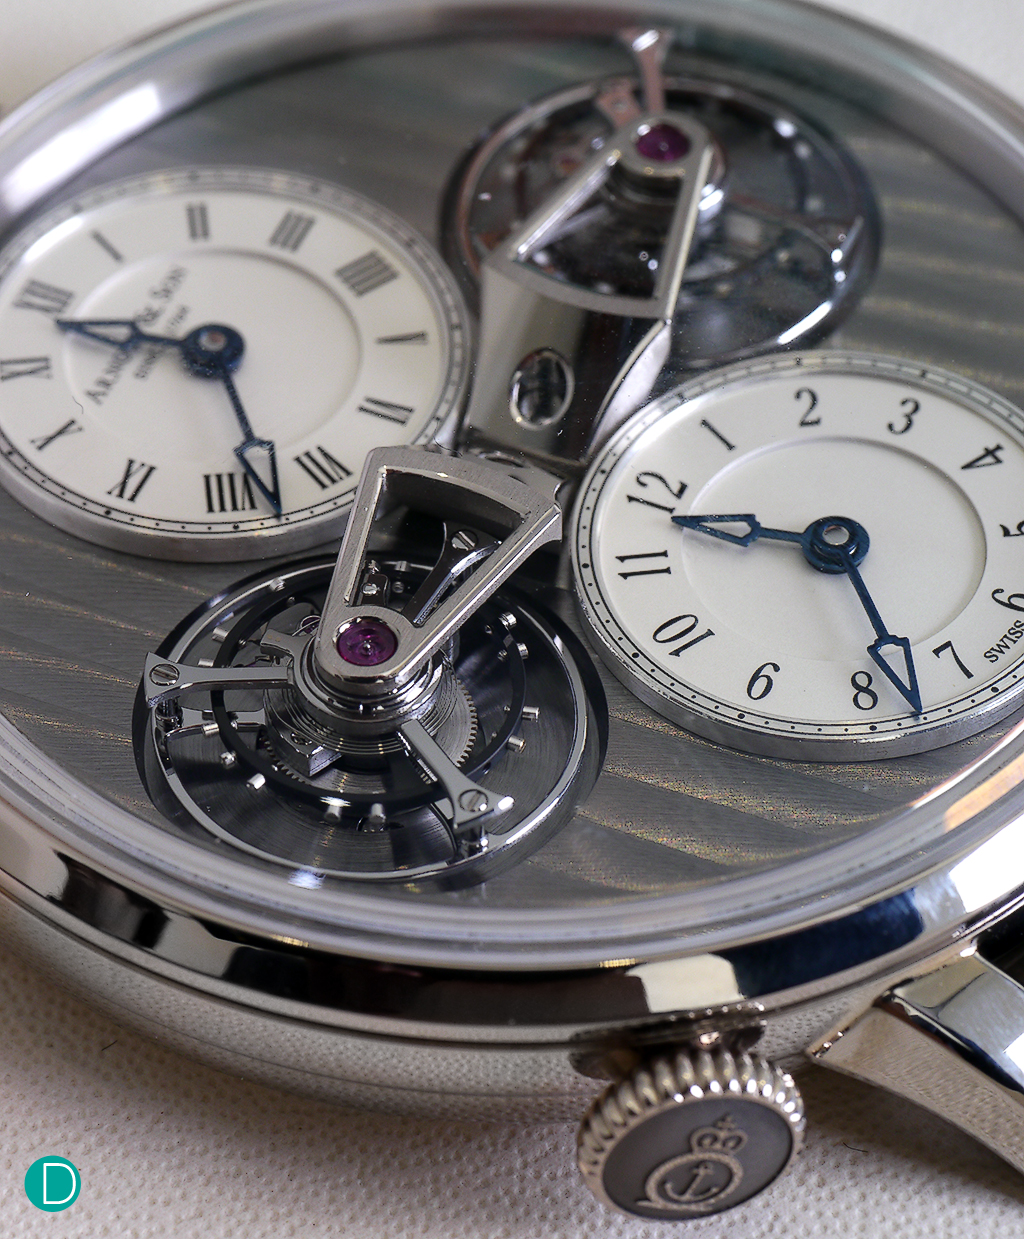 Another view of the dial side. The dual suspended tourbillons are quite a visual specatacle. 